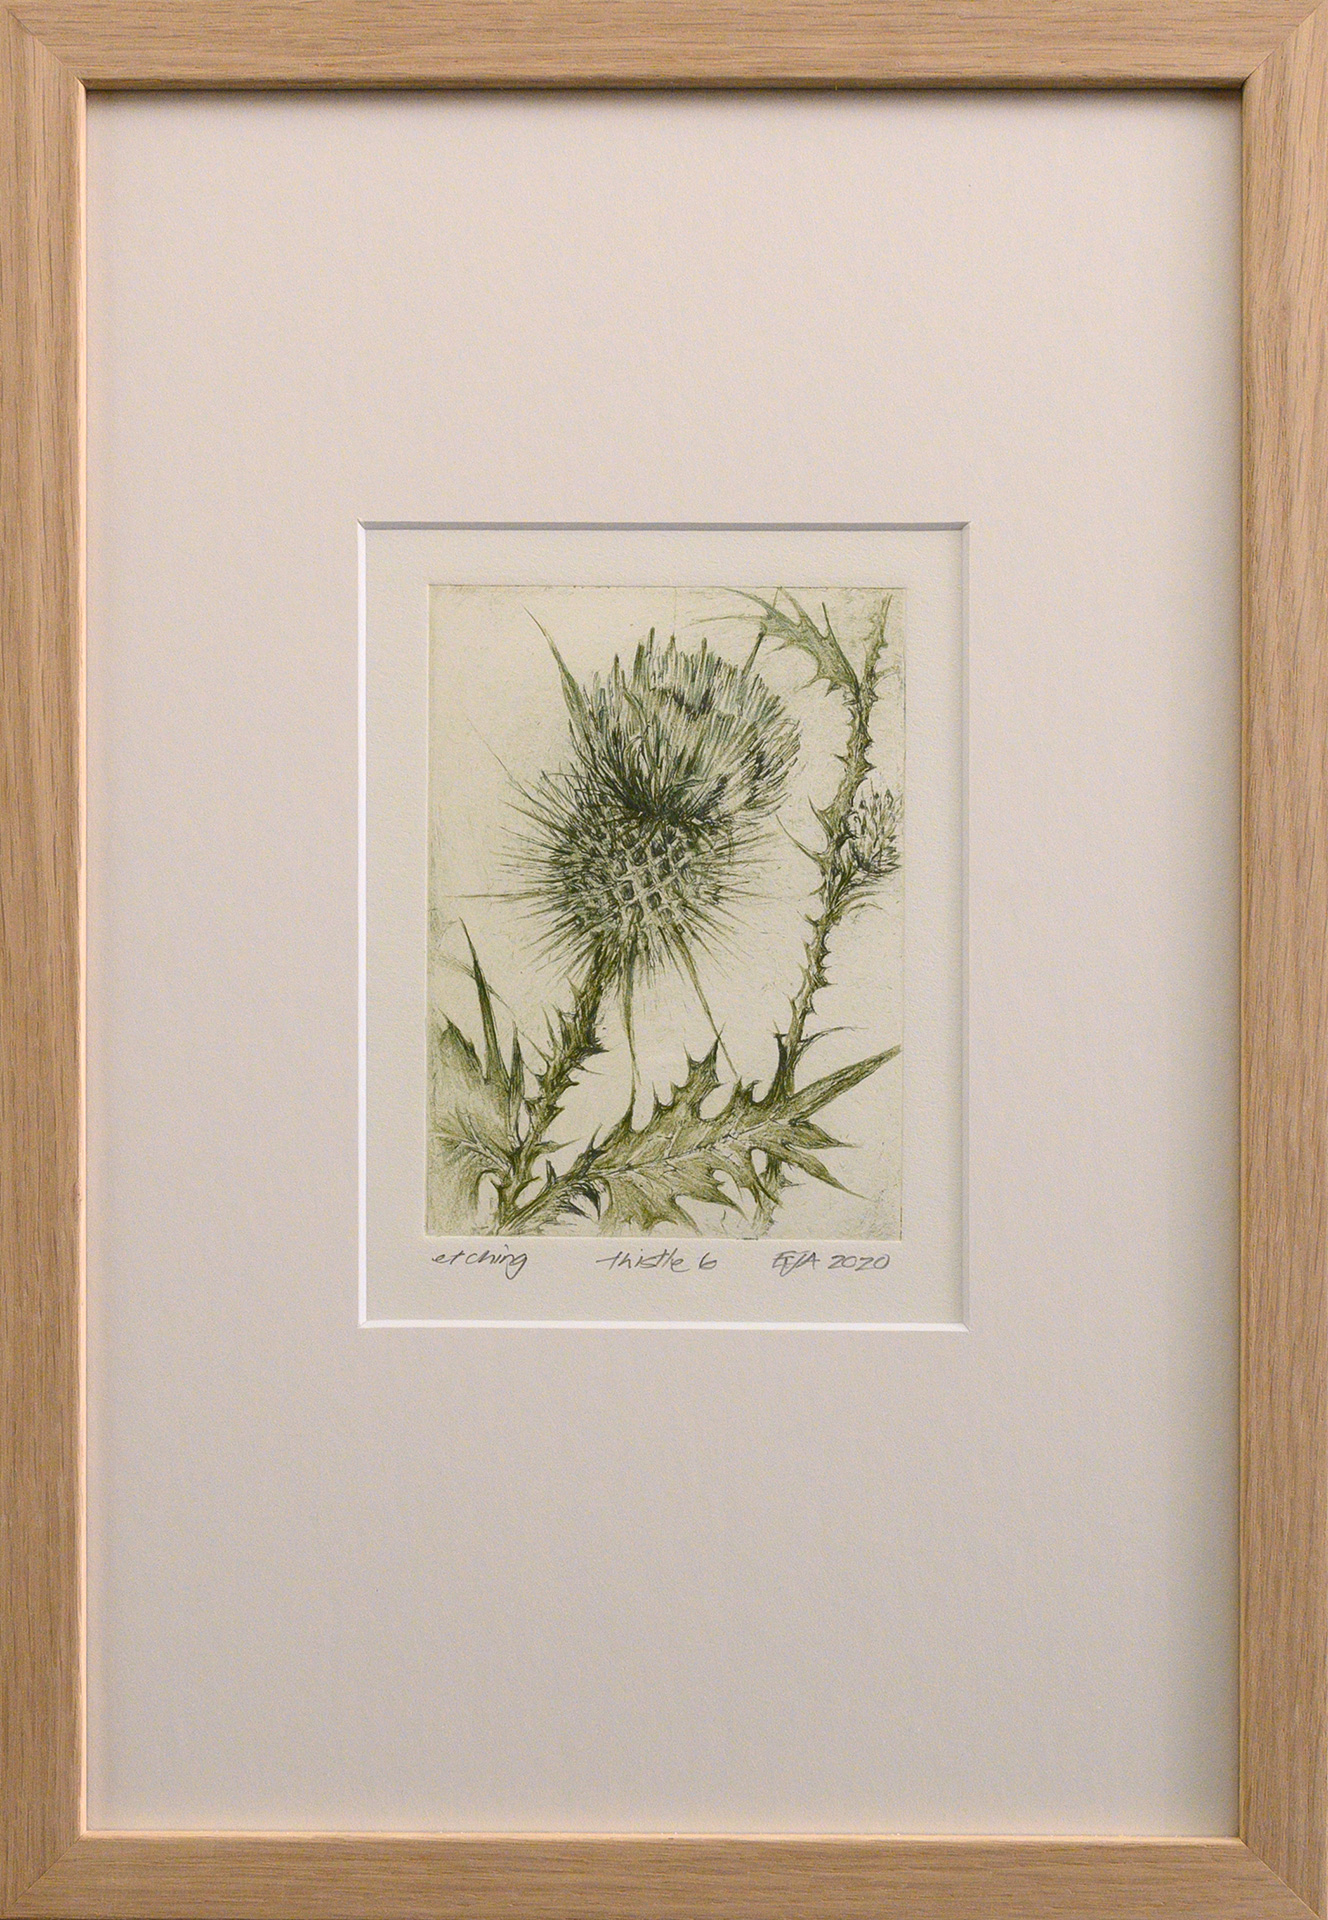 Framed artwork by Libby Altschwager of a bottle green image of a close up of a Scotch Thistle